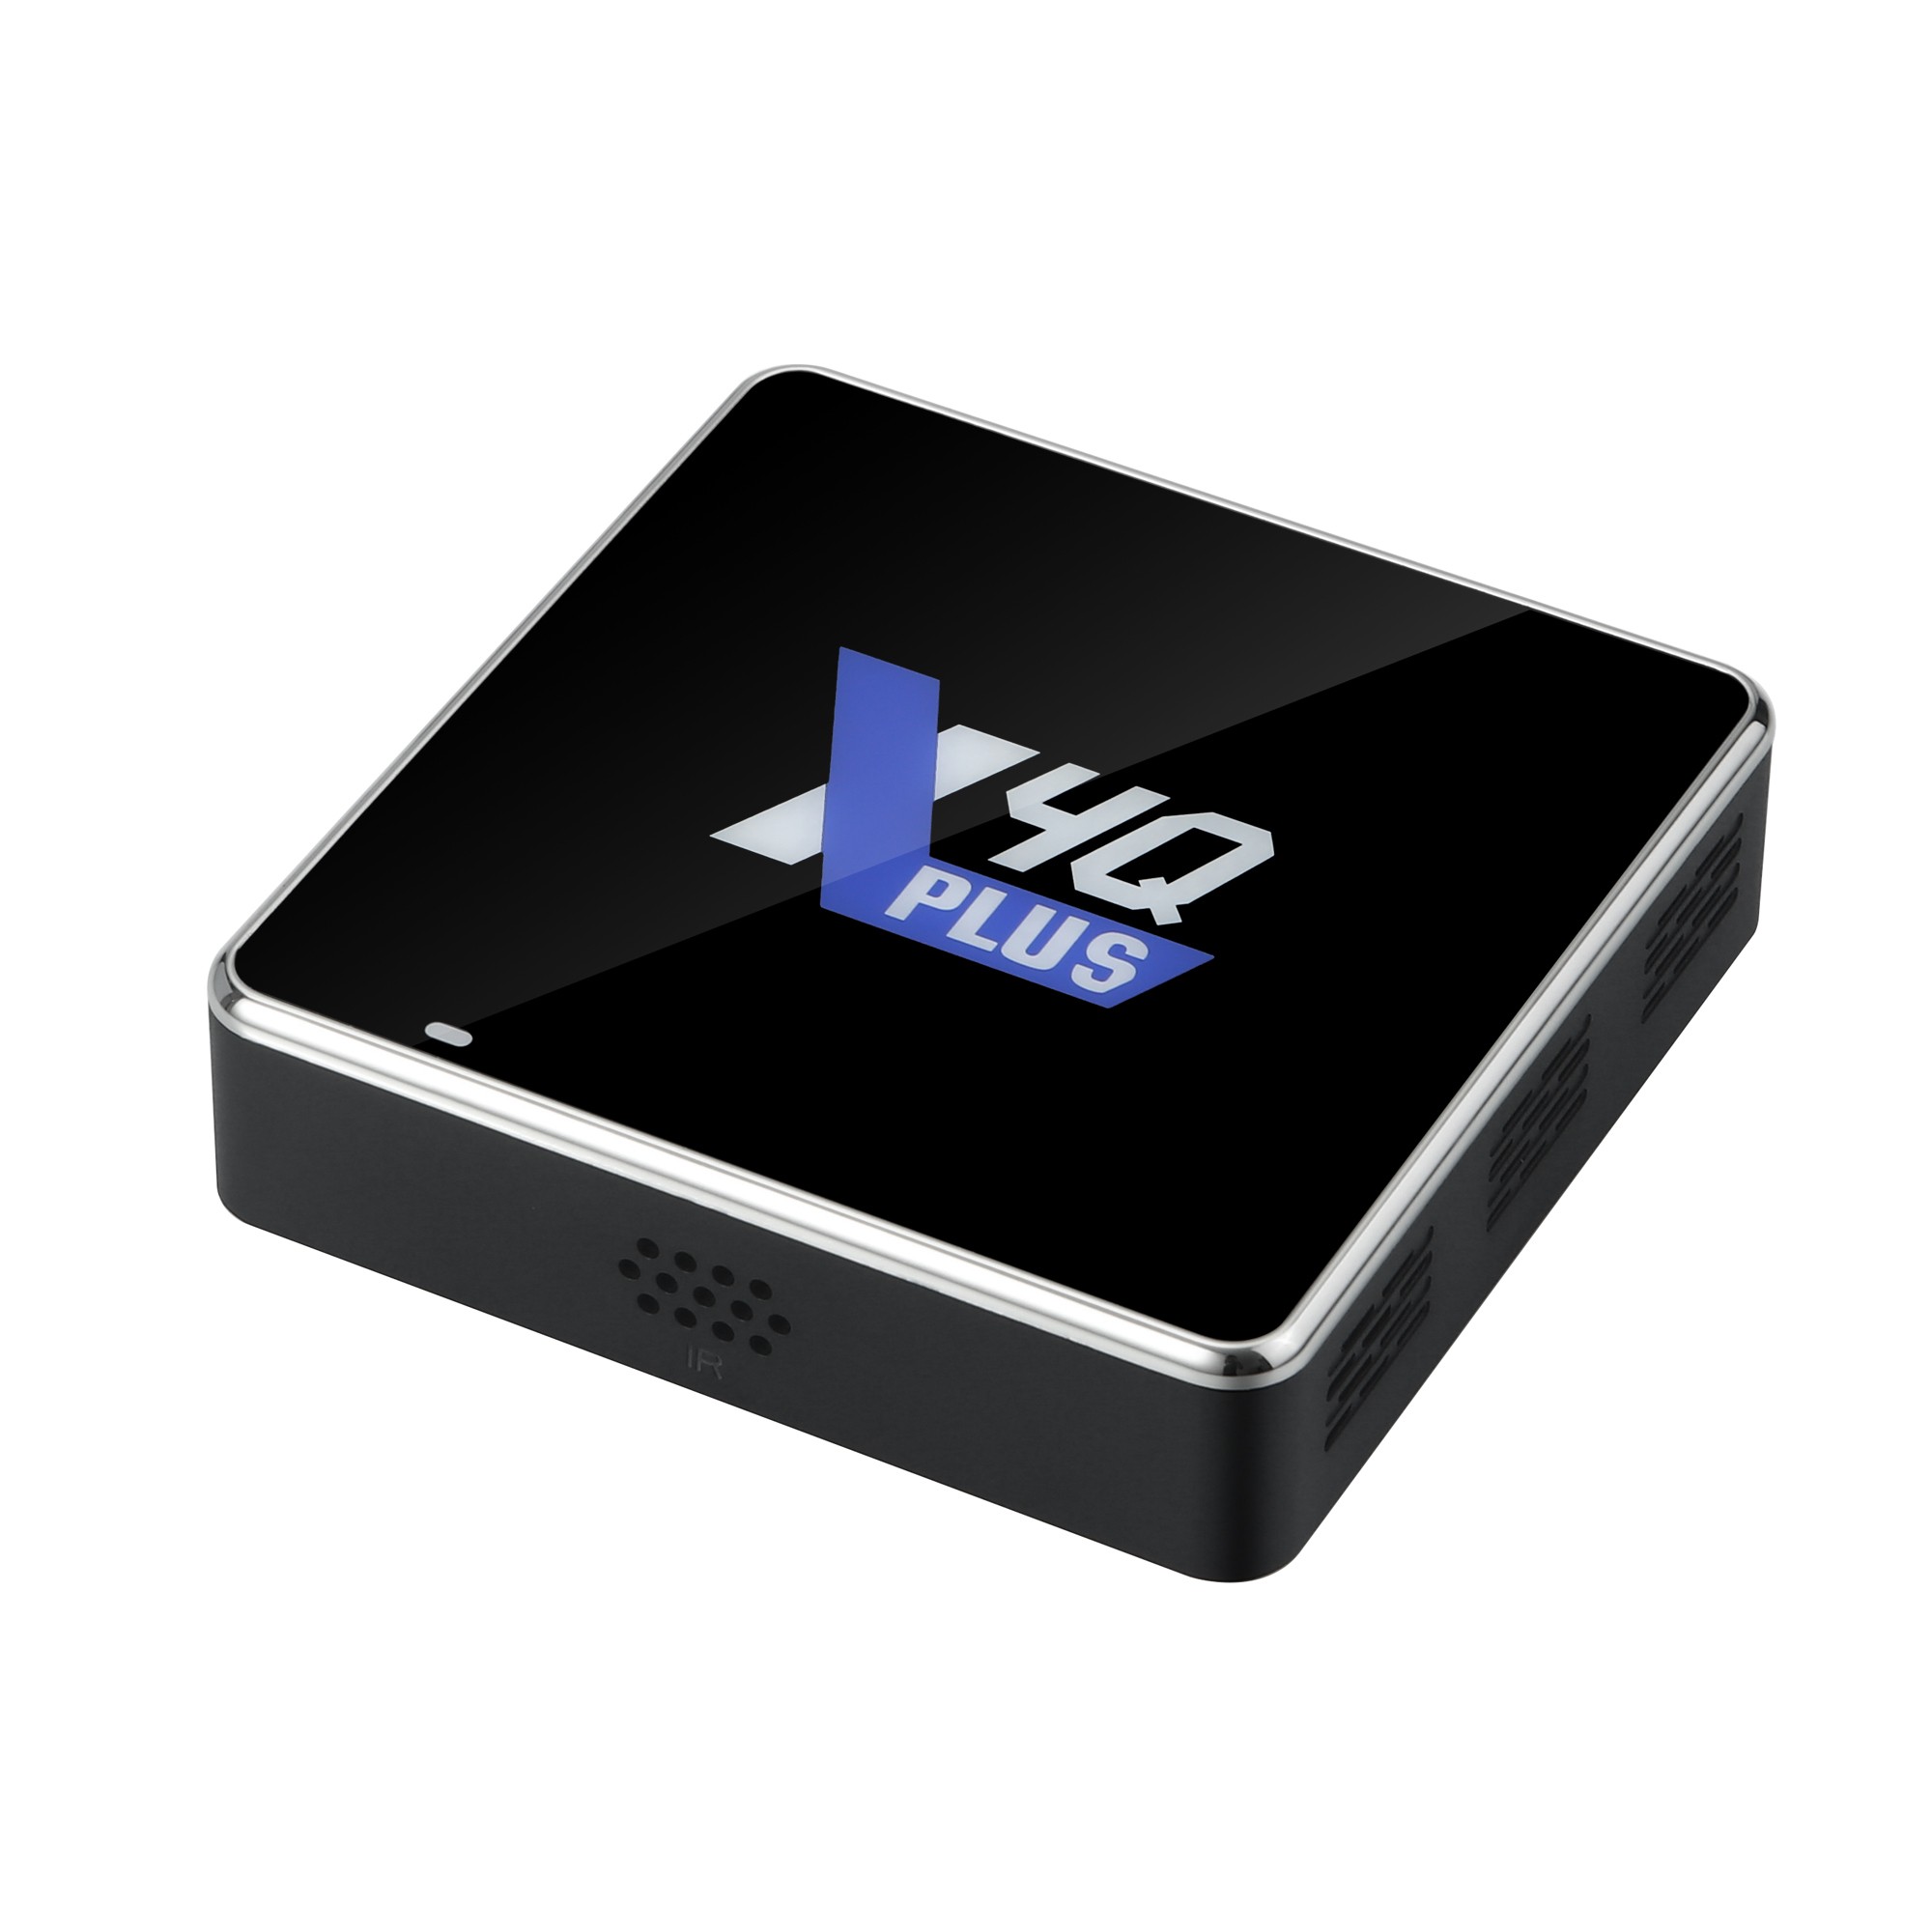 X4Q TV Box Family Series Devices based on Android 11